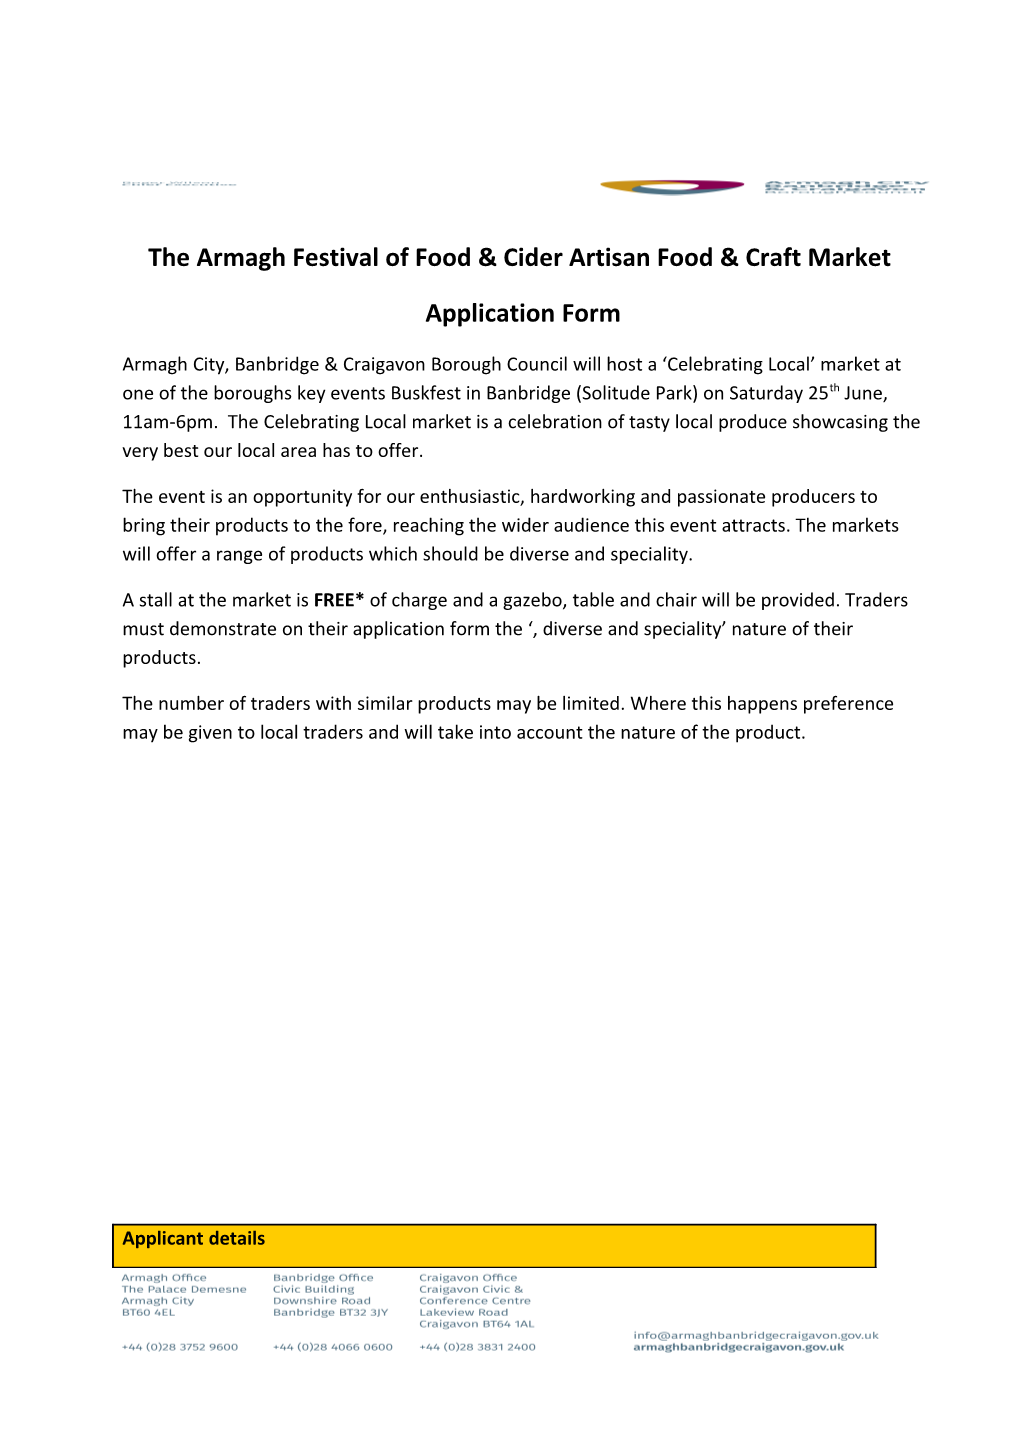 The Armagh Festival of Food & Cider Artisan Food & Craft Market